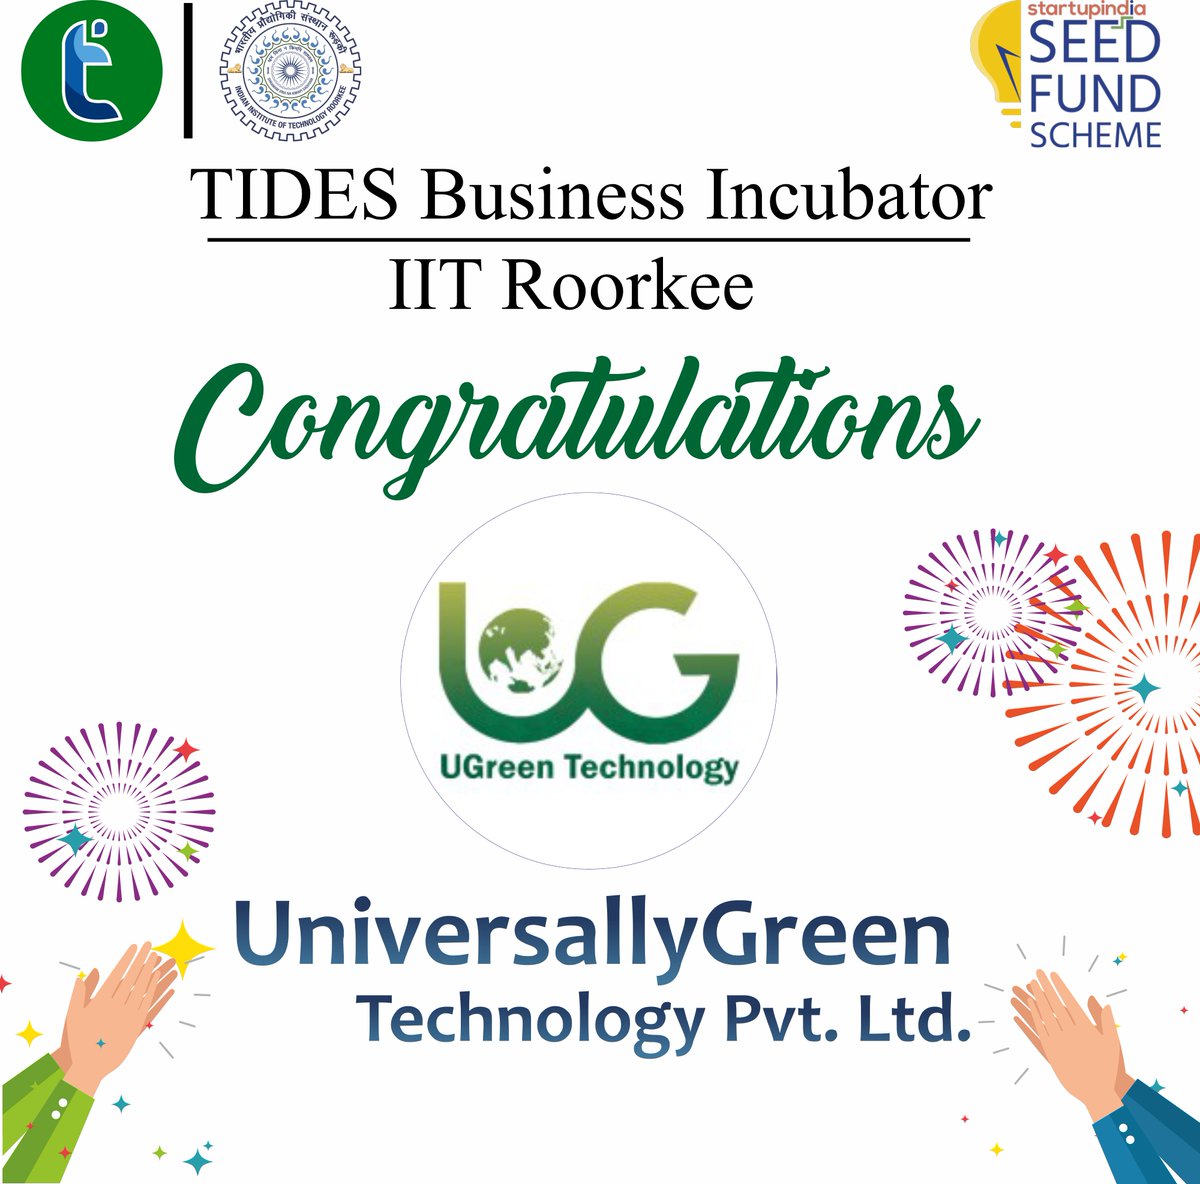 𝐓𝐈𝐃𝐄𝐒, 𝐈𝐈𝐓 𝐑𝐨𝐨𝐫𝐤𝐞𝐞 welcomes @UGreenTech_ Pvt. Ltd. under 𝐒𝐭𝐚𝐫𝐭𝐮𝐩 𝐈𝐧𝐝𝐢𝐚 𝐒𝐞𝐞𝐝 𝐅𝐮𝐧𝐝 𝐒𝐜𝐡𝐞𝐦𝐞. 🎉 We wish them all the best in their endeavours! 🌿👏 @iitroorkee | @startupindia #Technology #StartupIndia #Innovation #StartupSuccess #cleantech